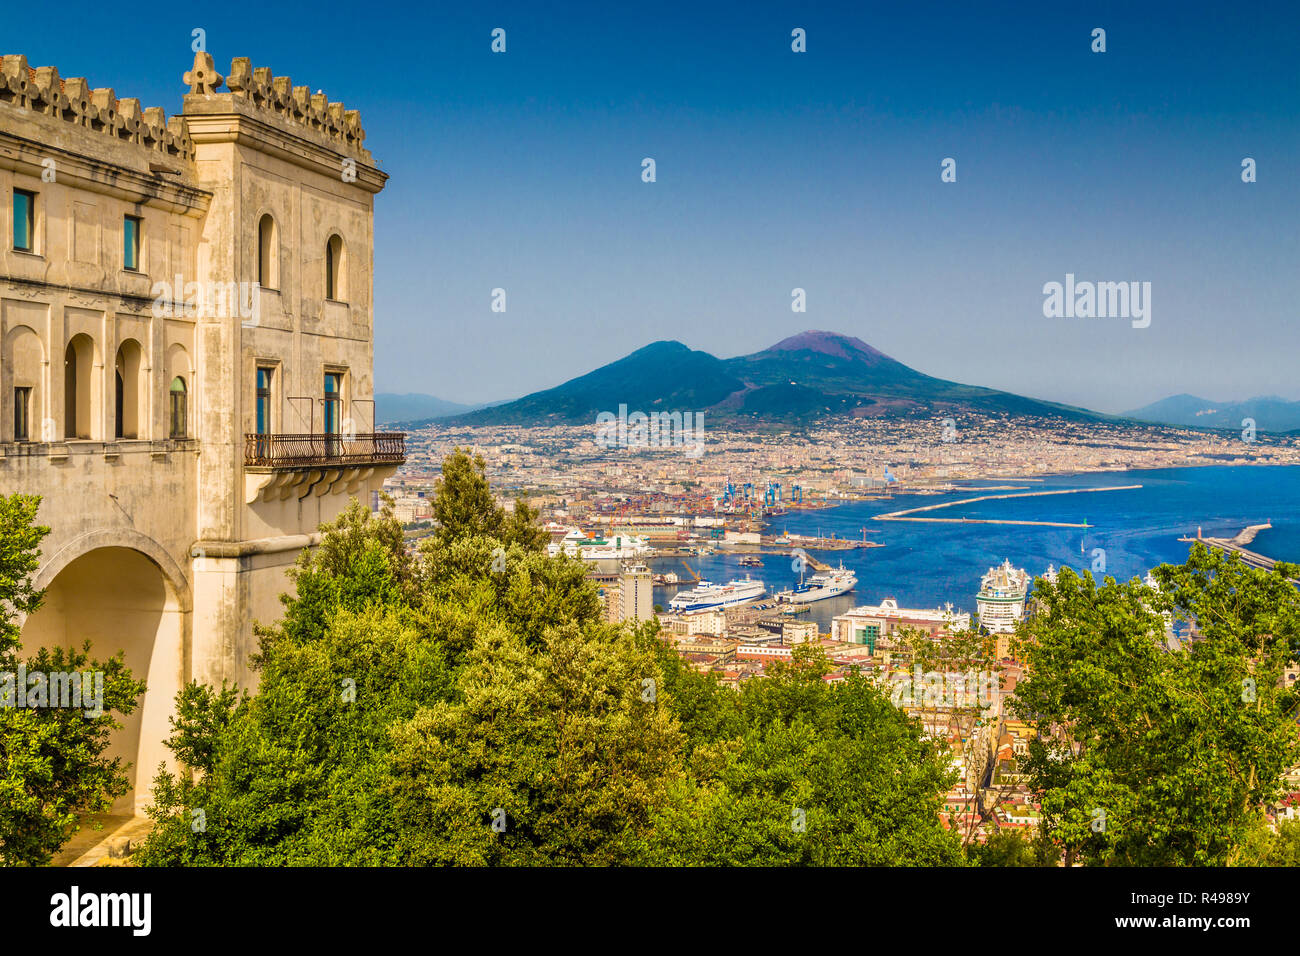 Scenic picture-postcard view of the city of Naples (Napoli) with famous Mount Vesuvius in the background from Certosa di San Martino monastery, Campan Stock Photo